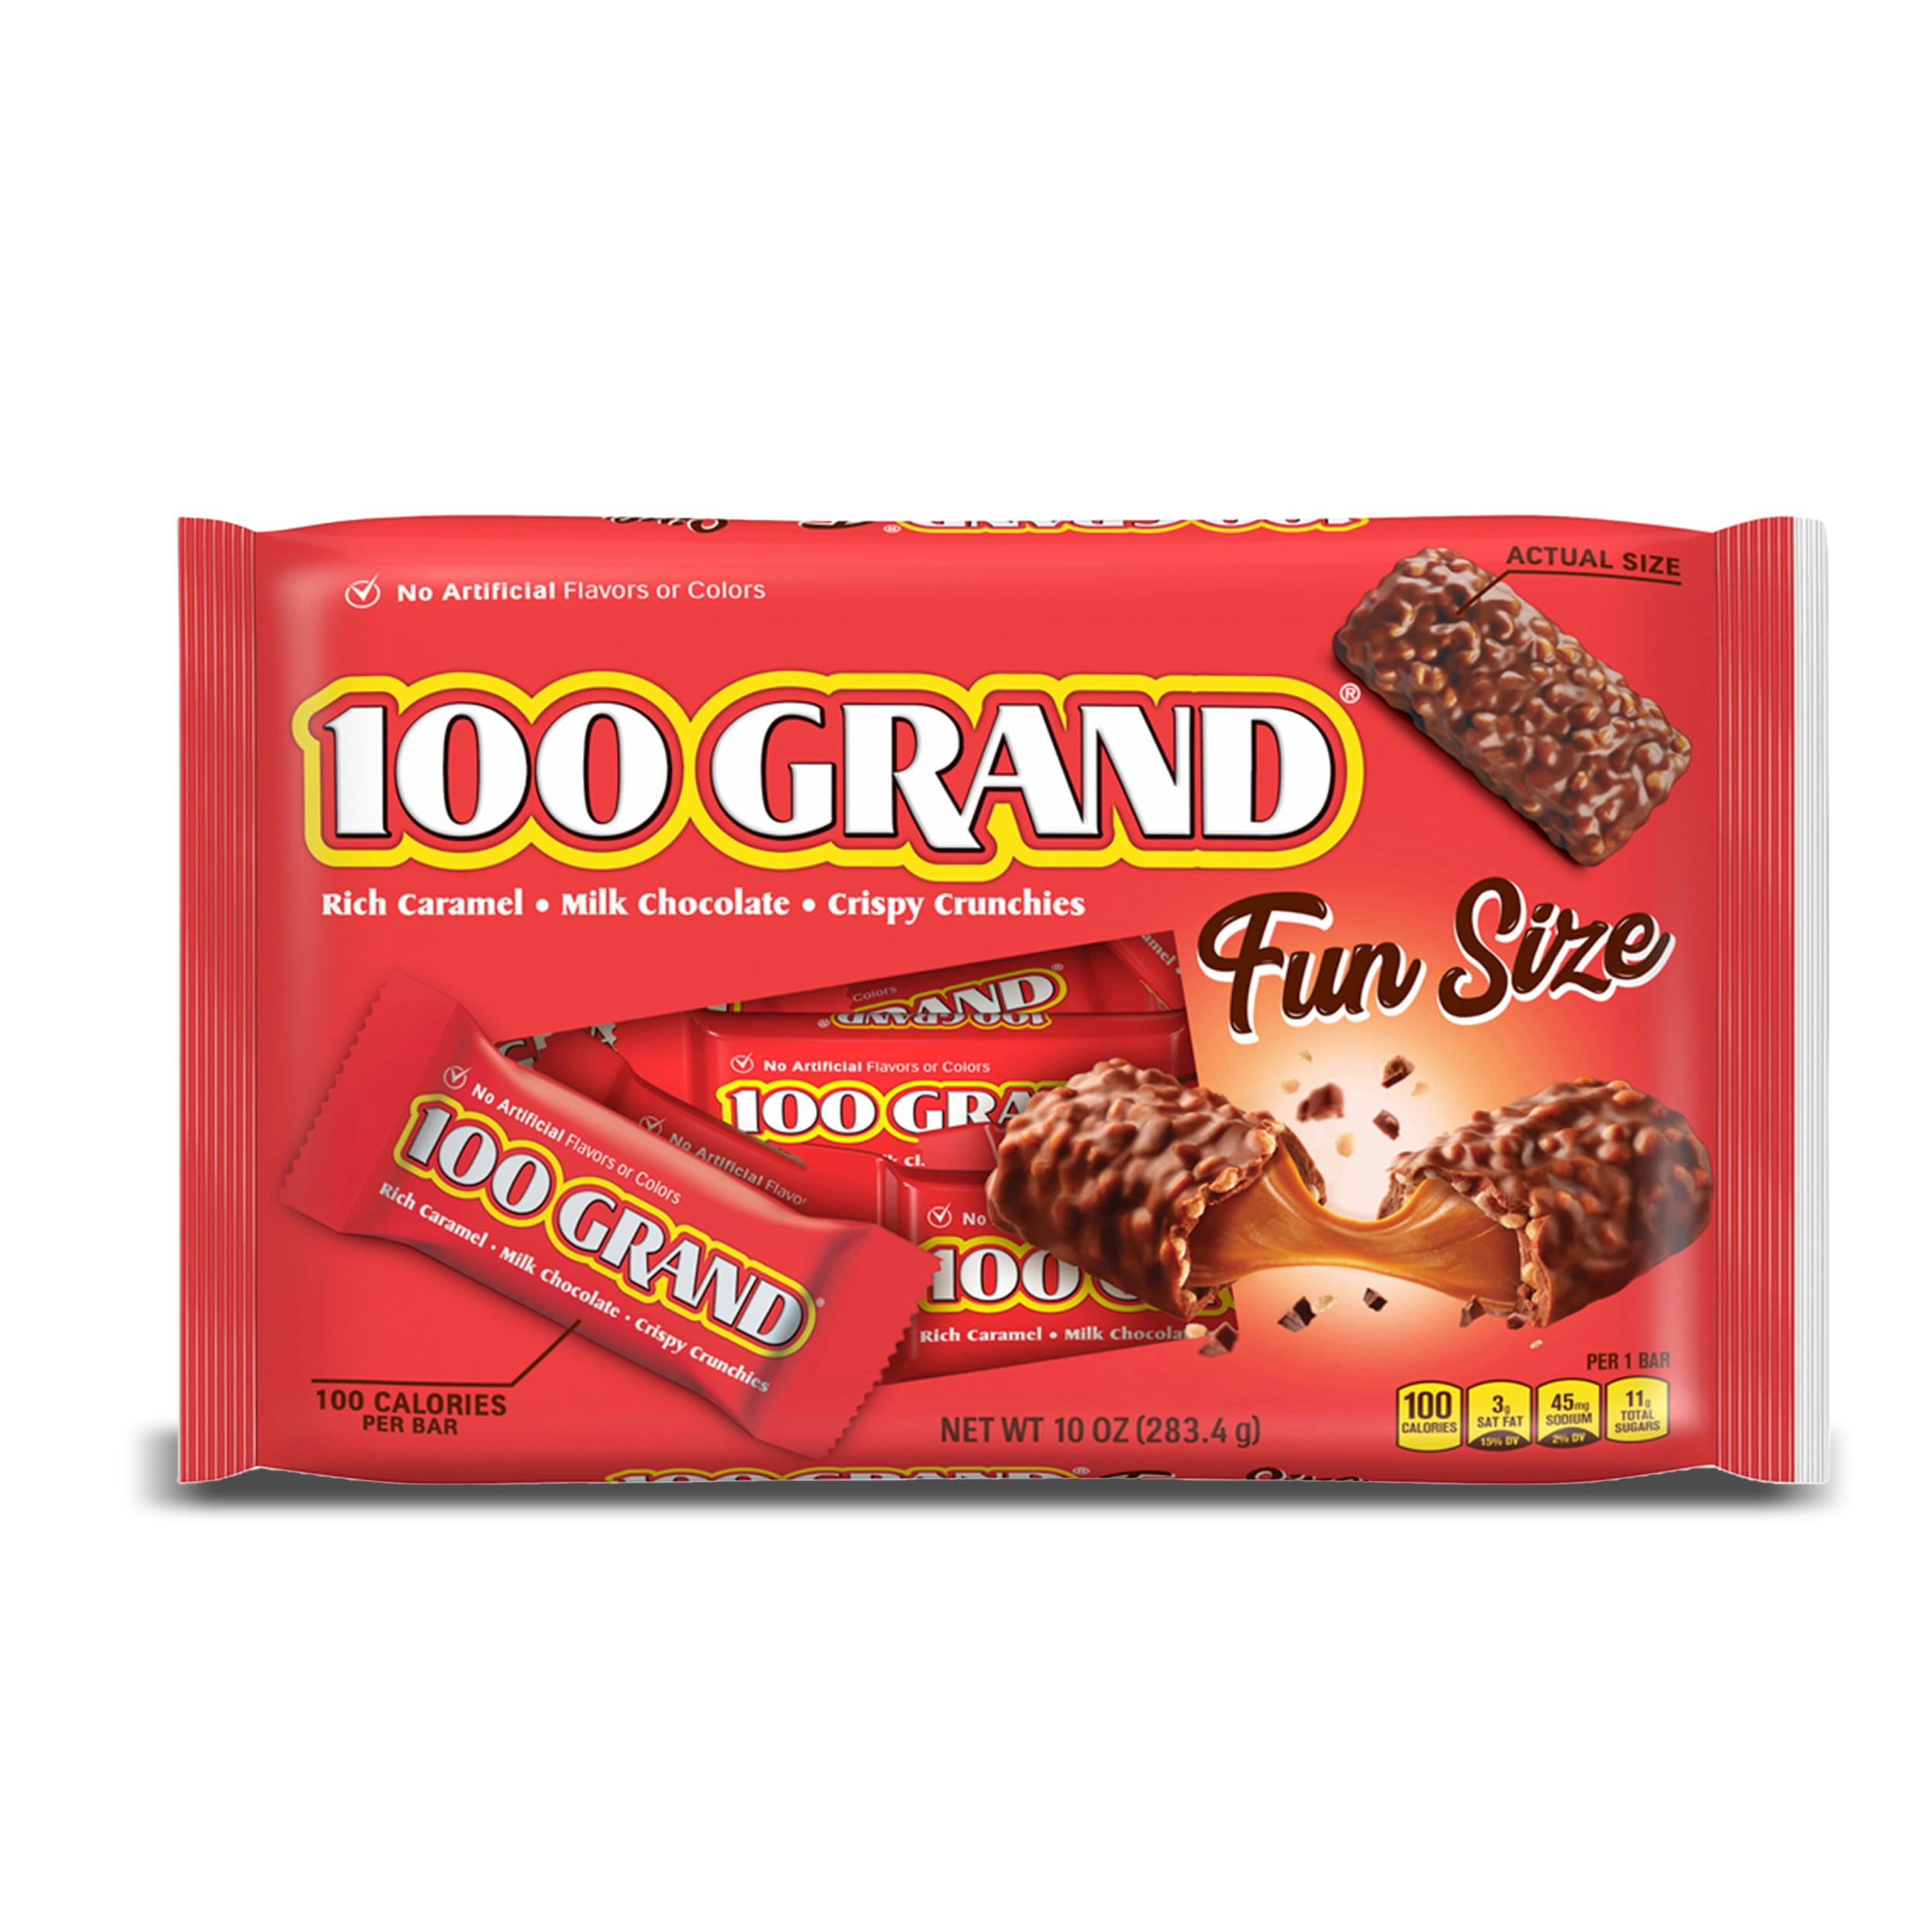 100 Grand Milk Chocolate Fun Size Candy Bars, Bulk Individually Wrapped Ferrero Candy Bag, 10 Ounce, 6 Count, Size: 10 Ounce (Pack of 6)